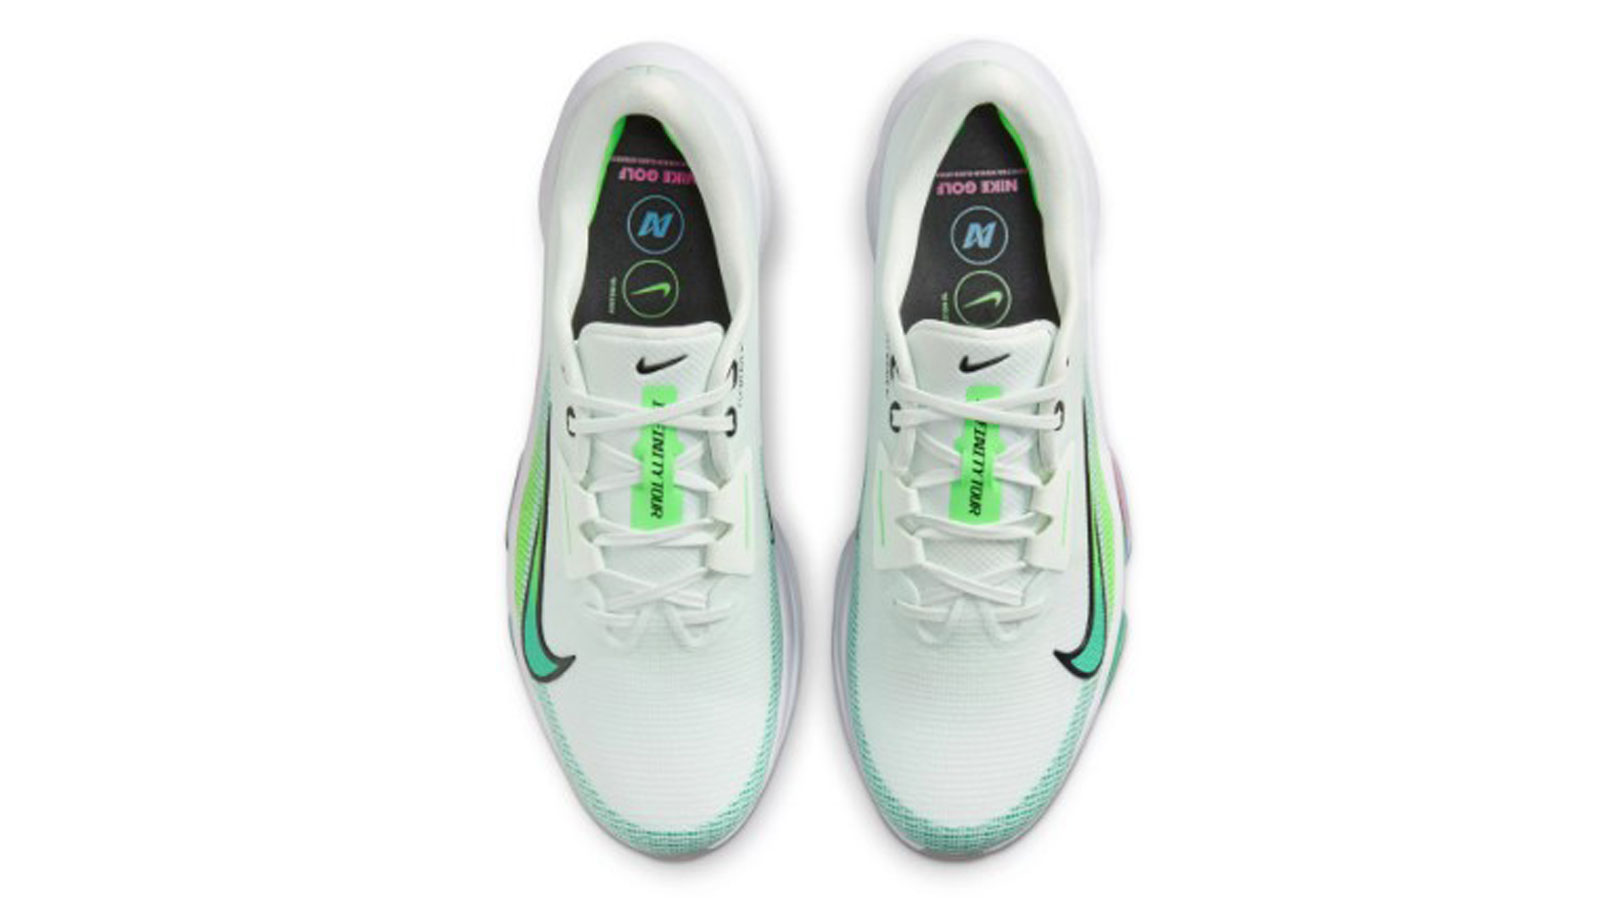 The upper of the Nike Air Zoom Infinity Tour NEXT% 2 NRG Golf Shoes